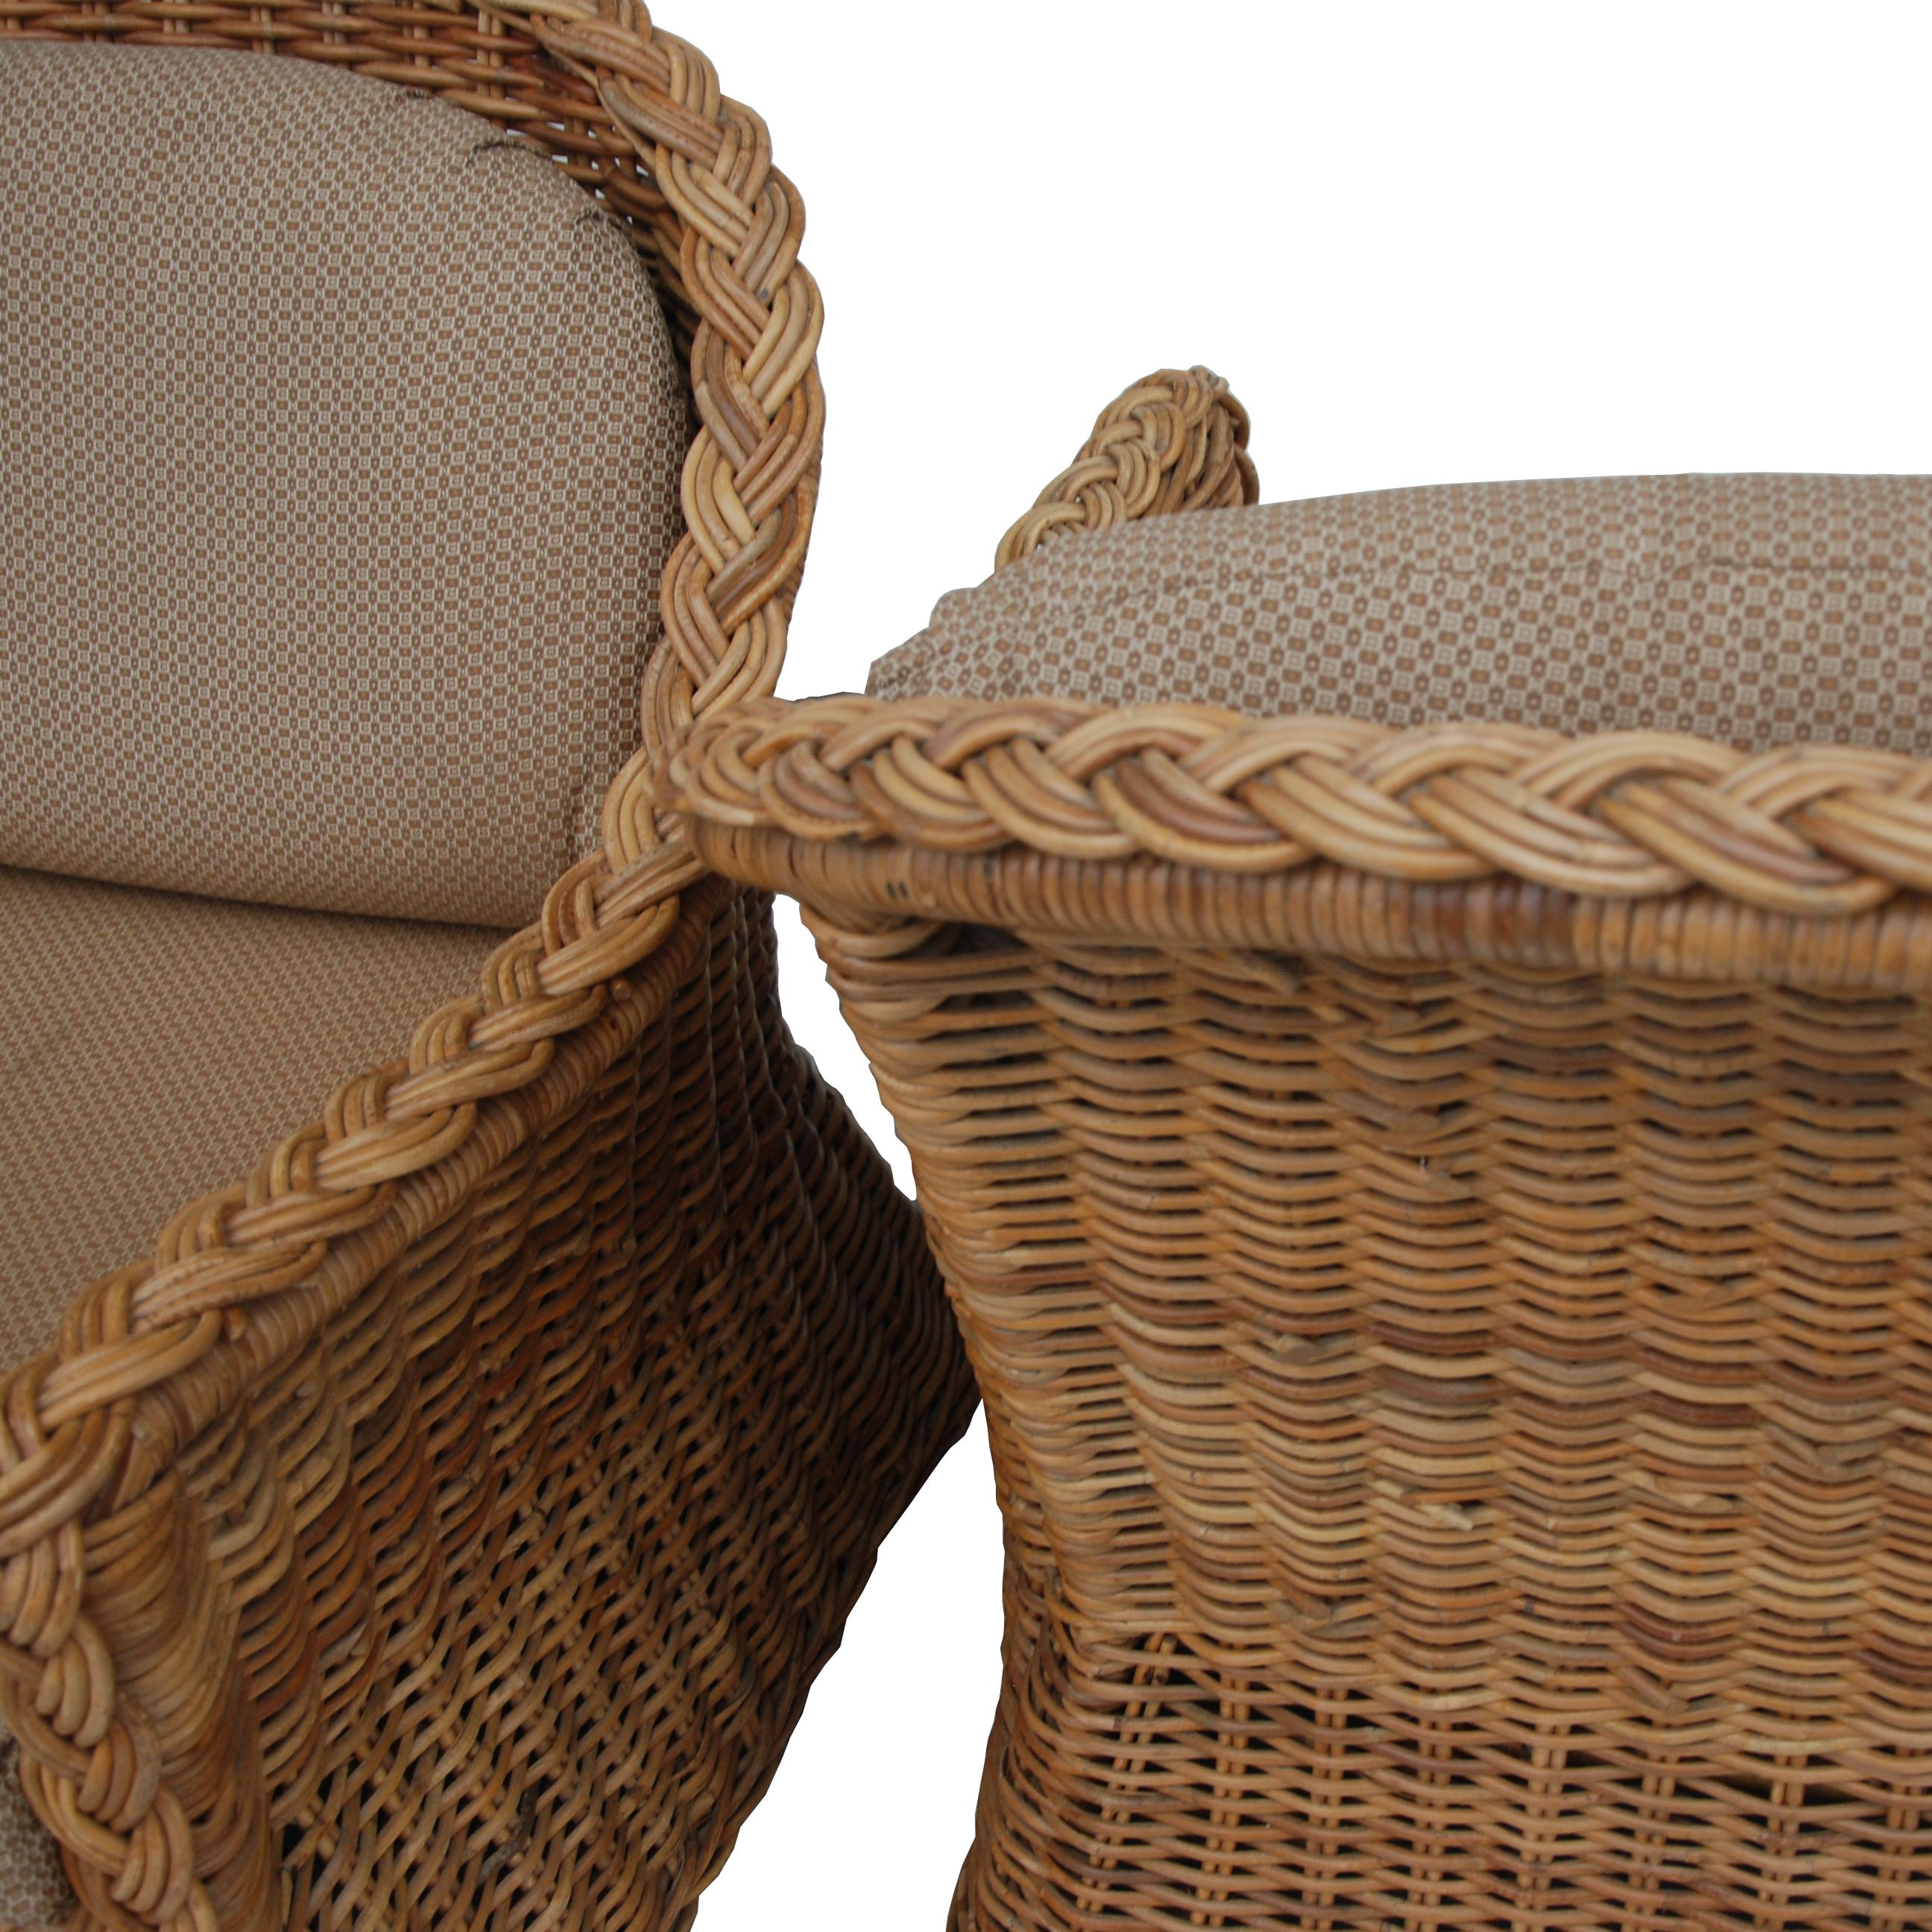 North American Pair of Wicker Works Braided Rattan Lounge Chairs